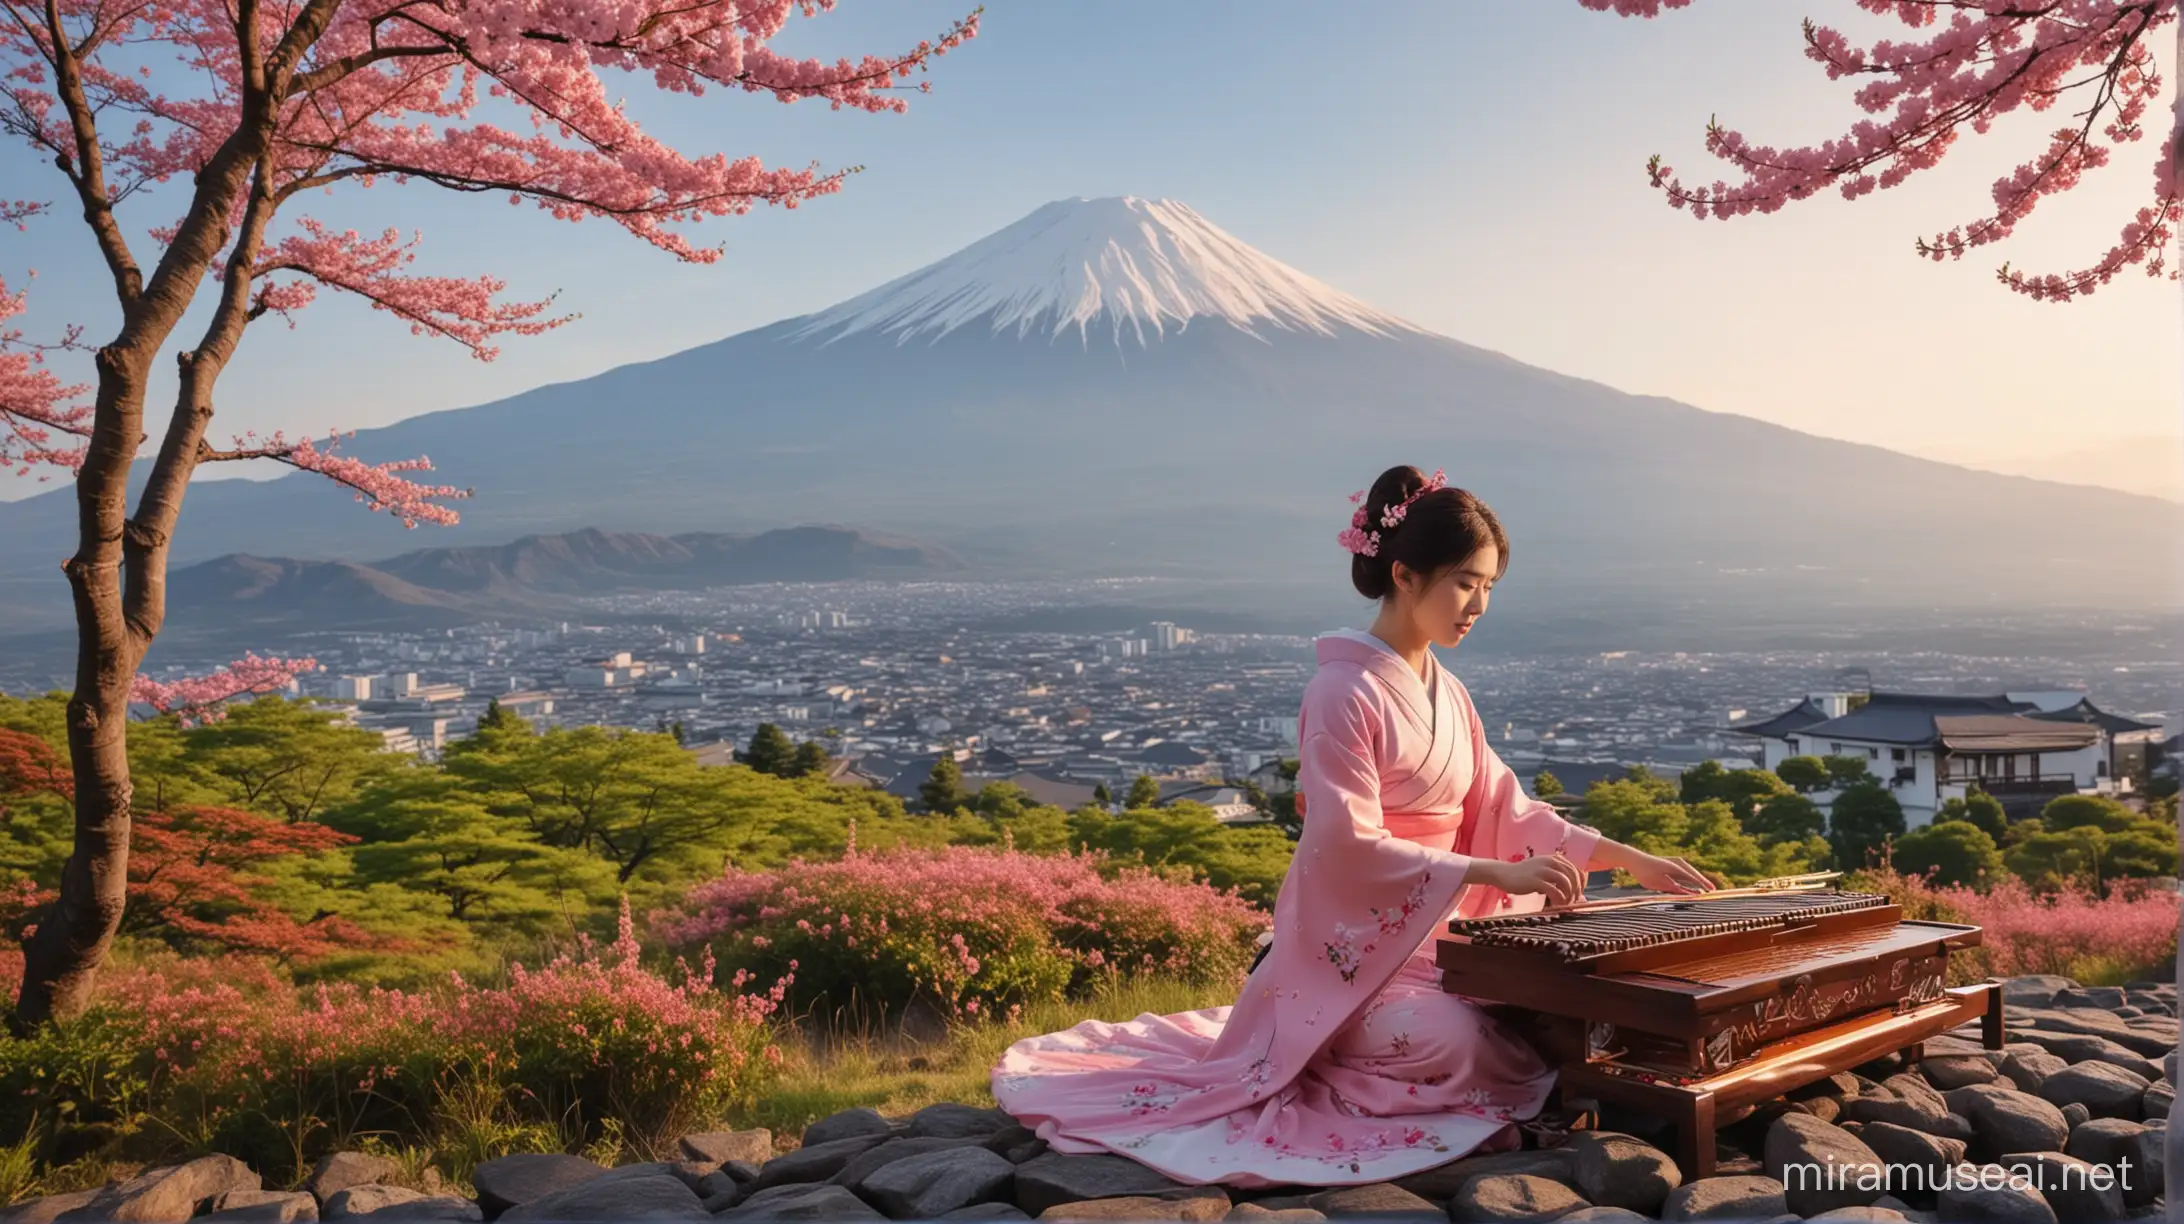 Japanese beauty, fuji, nature, attractive, green, pink cherry, culture, girl is playing koto music in the front of   fuji mount. Girl in attractive dressing a